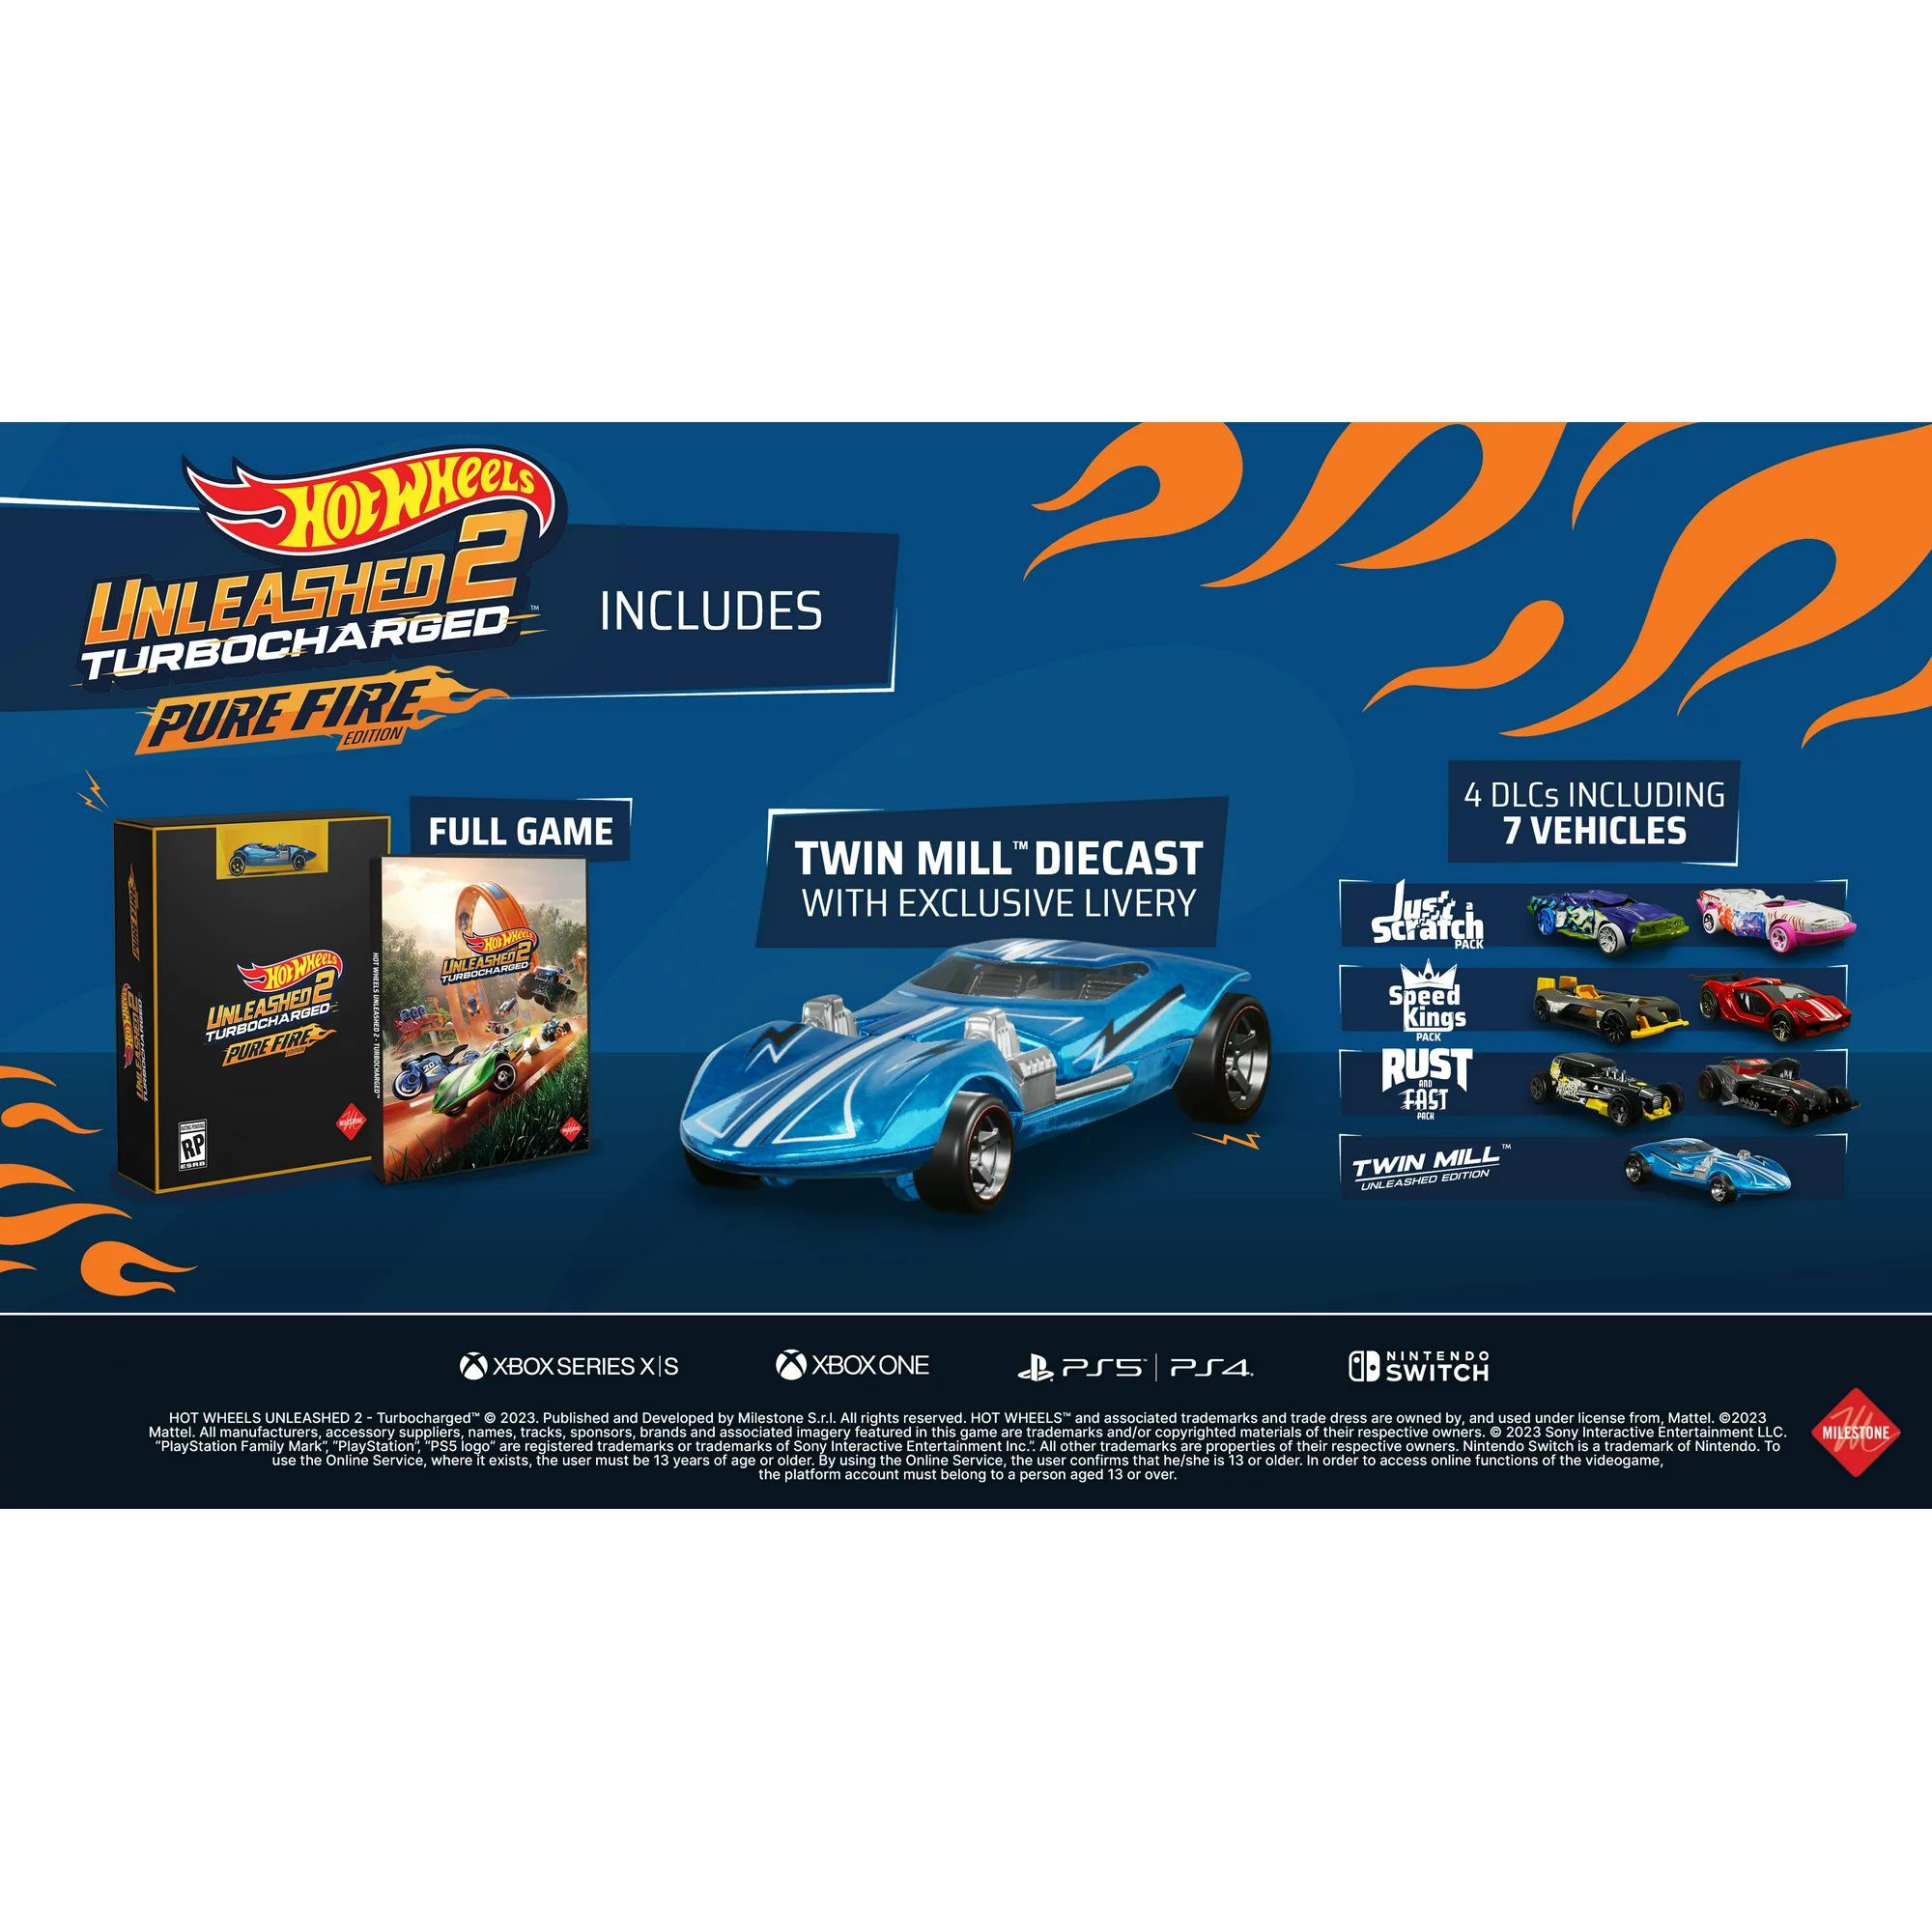 Hot Wheels Unleashed (English) for Nintendo Switch